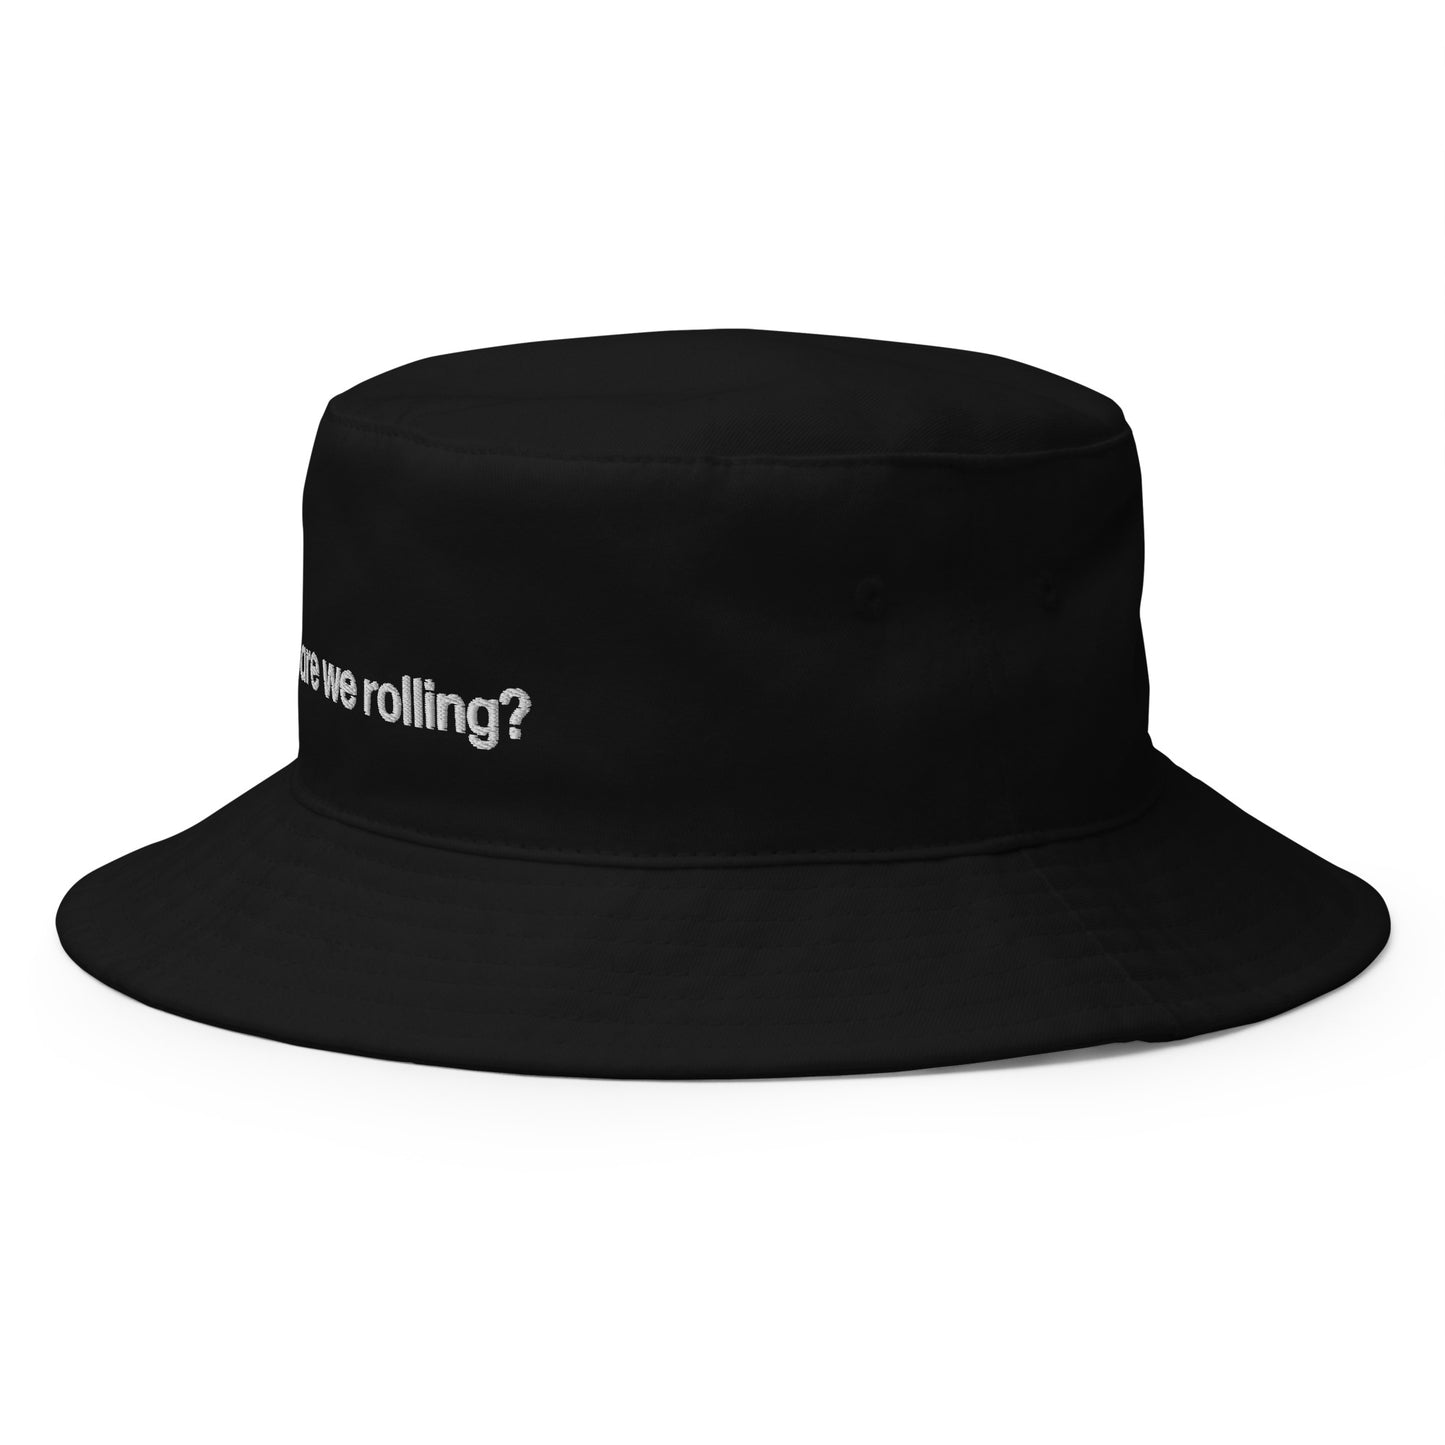 are we rolling? | bucket hat